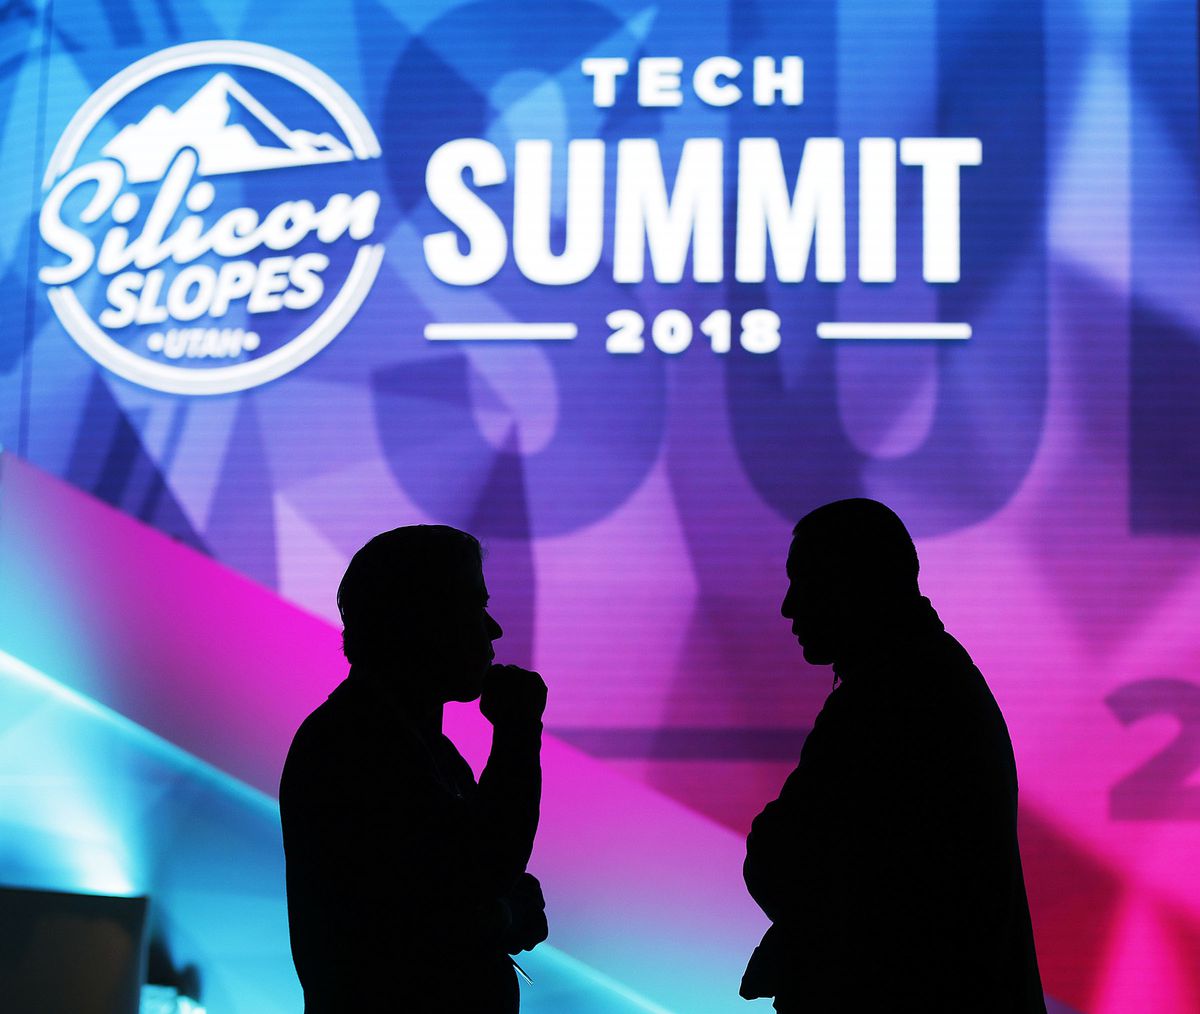 Bruce D Juhlin, left, and Mike Chao talk between sessions of the Silicon Slopes Tech Summit at the Salt Palace in Salt Lake City on Friday, Jan. 19, 2018.